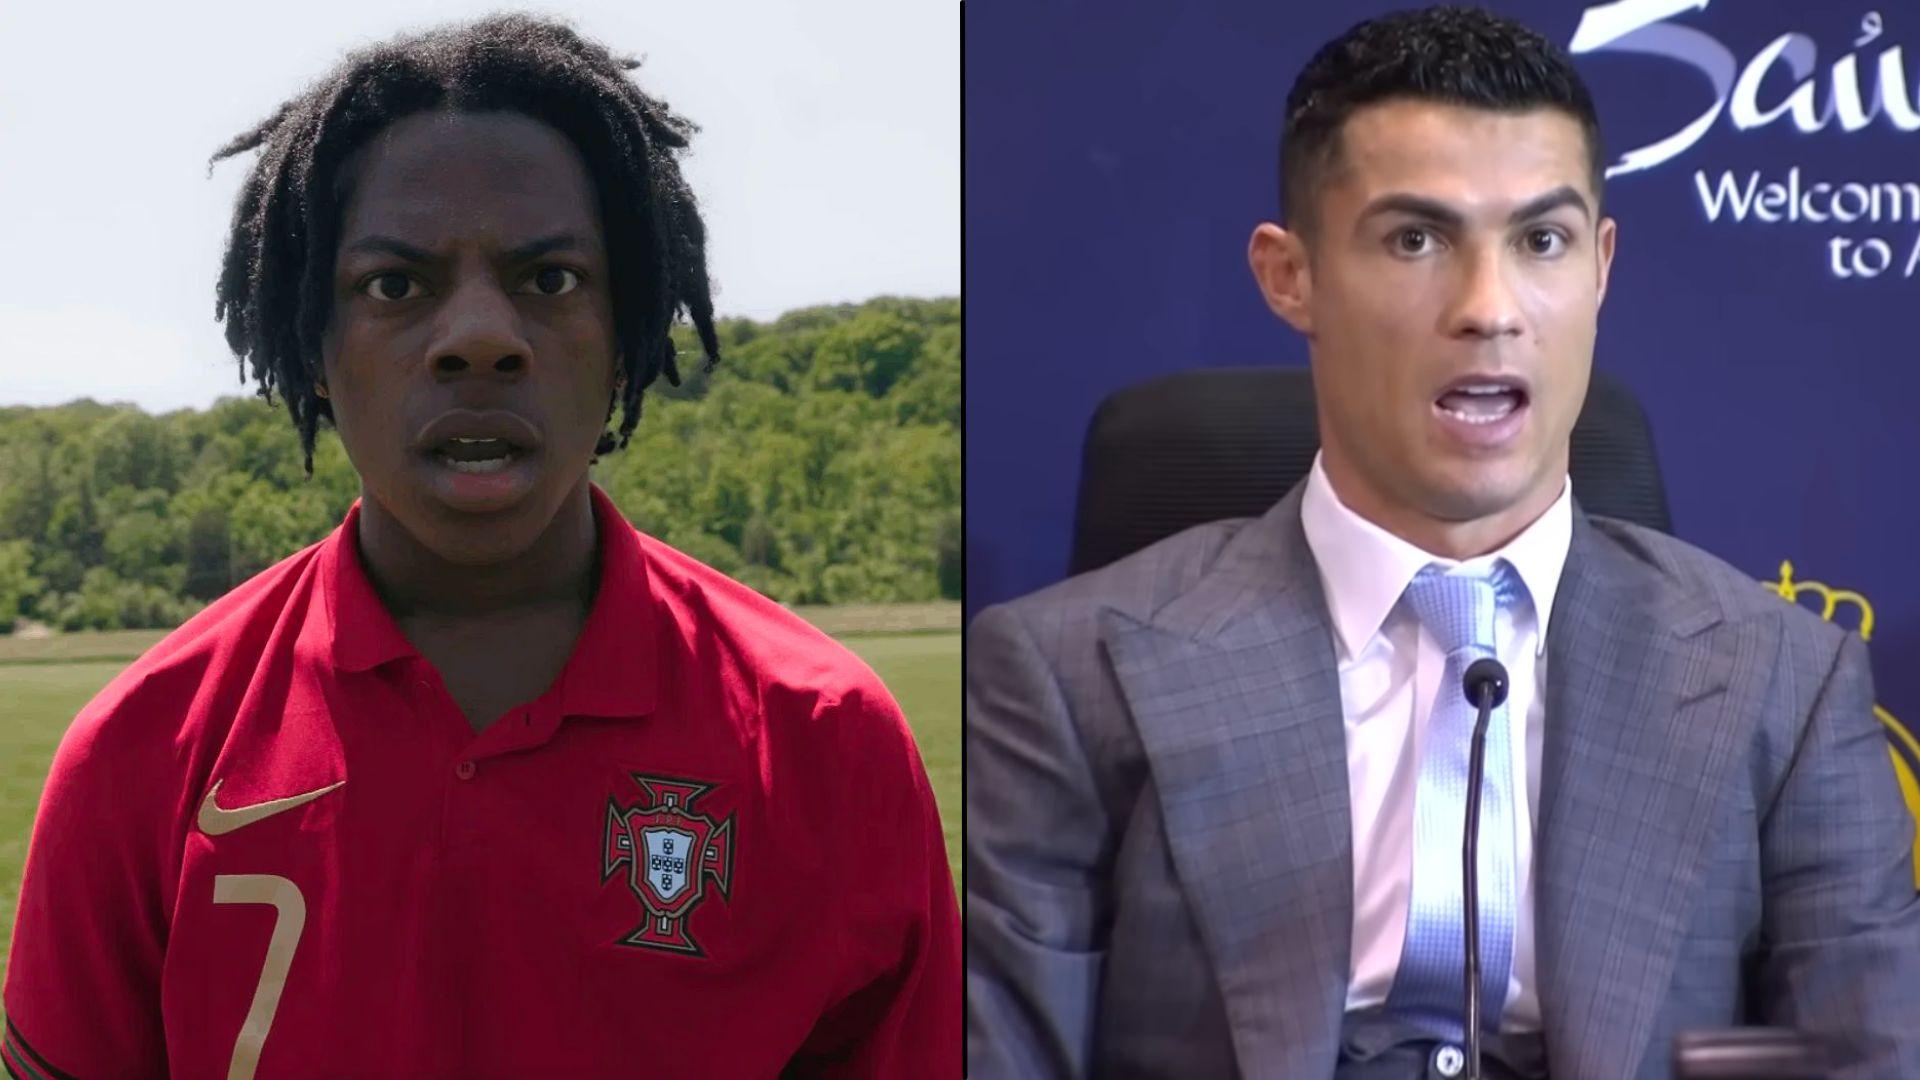 iShowSpeed side-by-side with Cristiano Ronaldo in suit